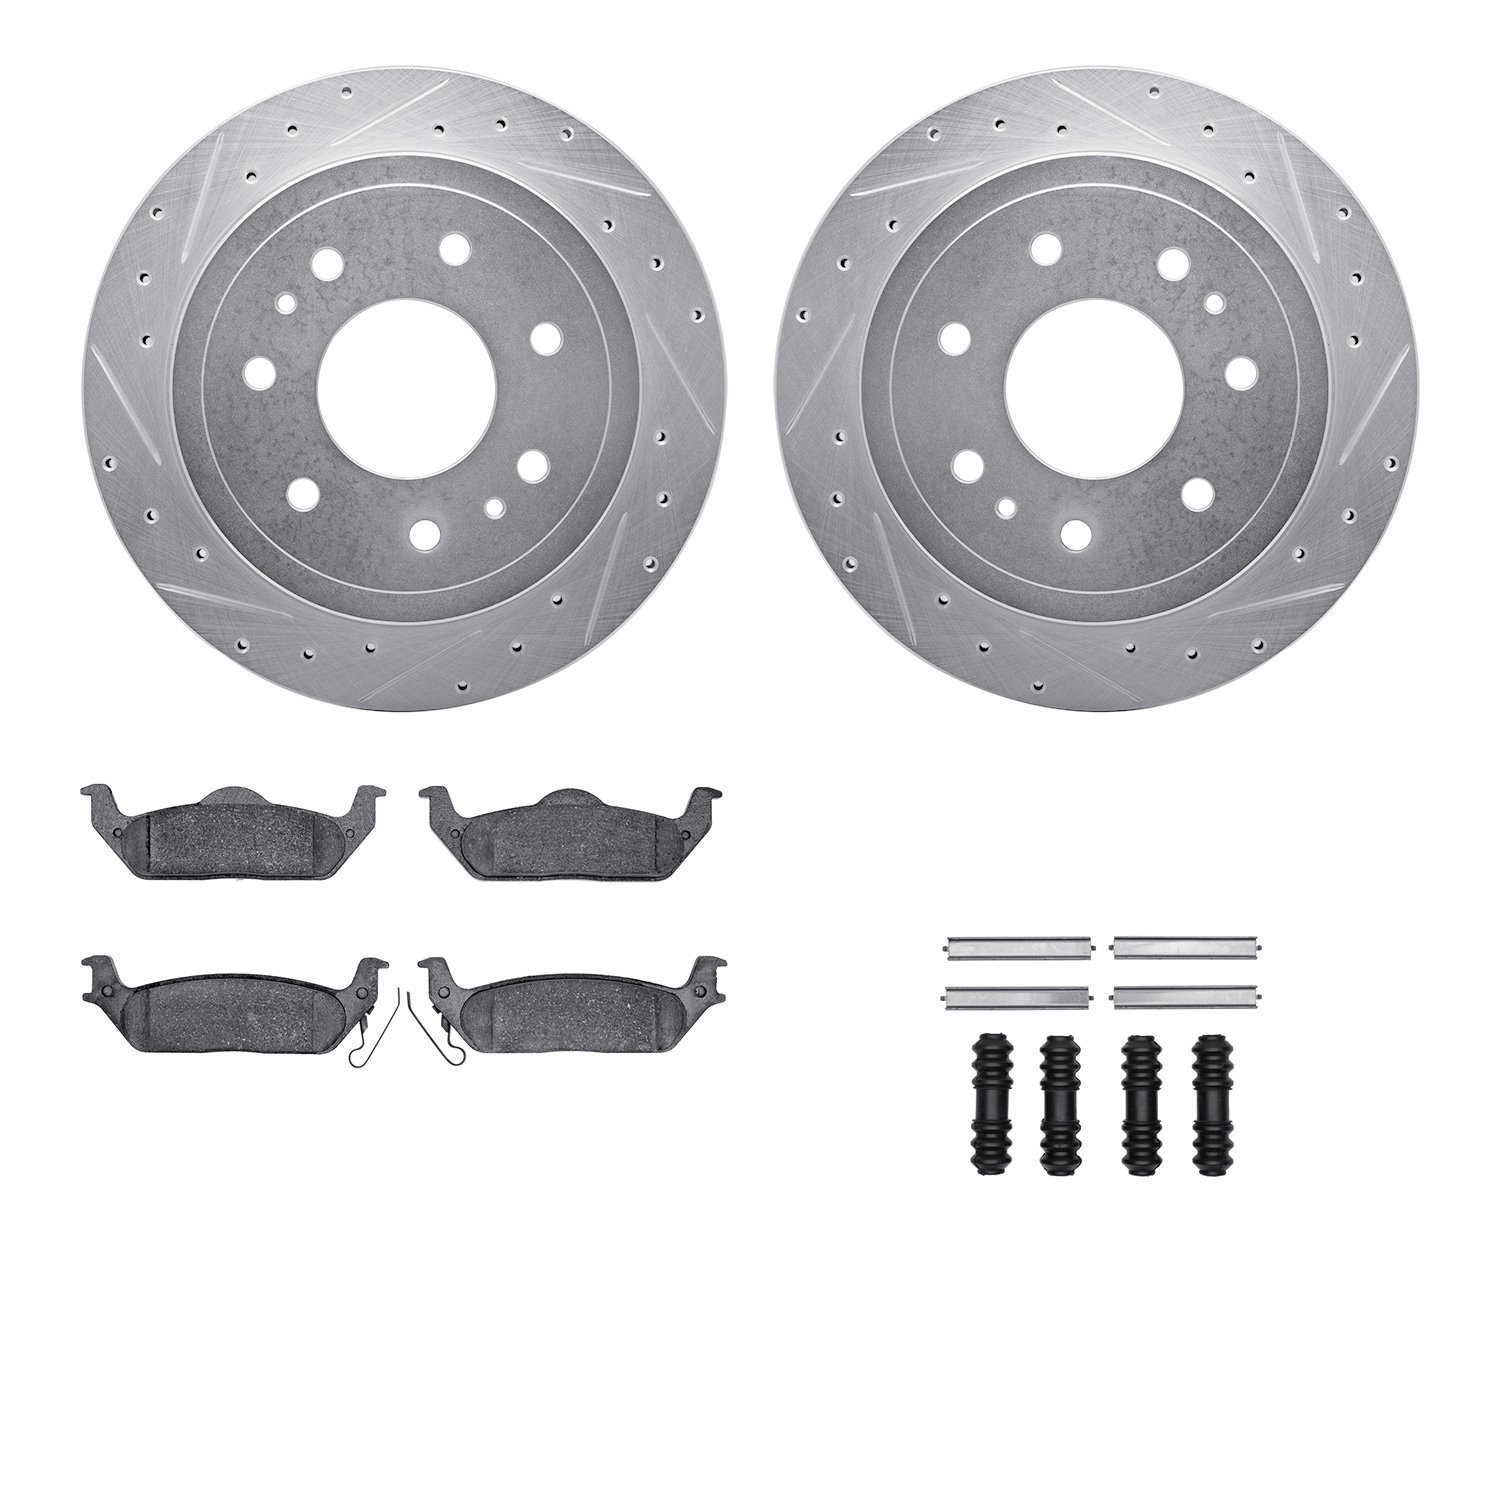 7412-54076 Drilled/Slotted Brake Rotors with Ultimate-Duty Brake Pads Kit & Hardware [Silver], 2004-2011 Ford/Lincoln/Mercury/Ma